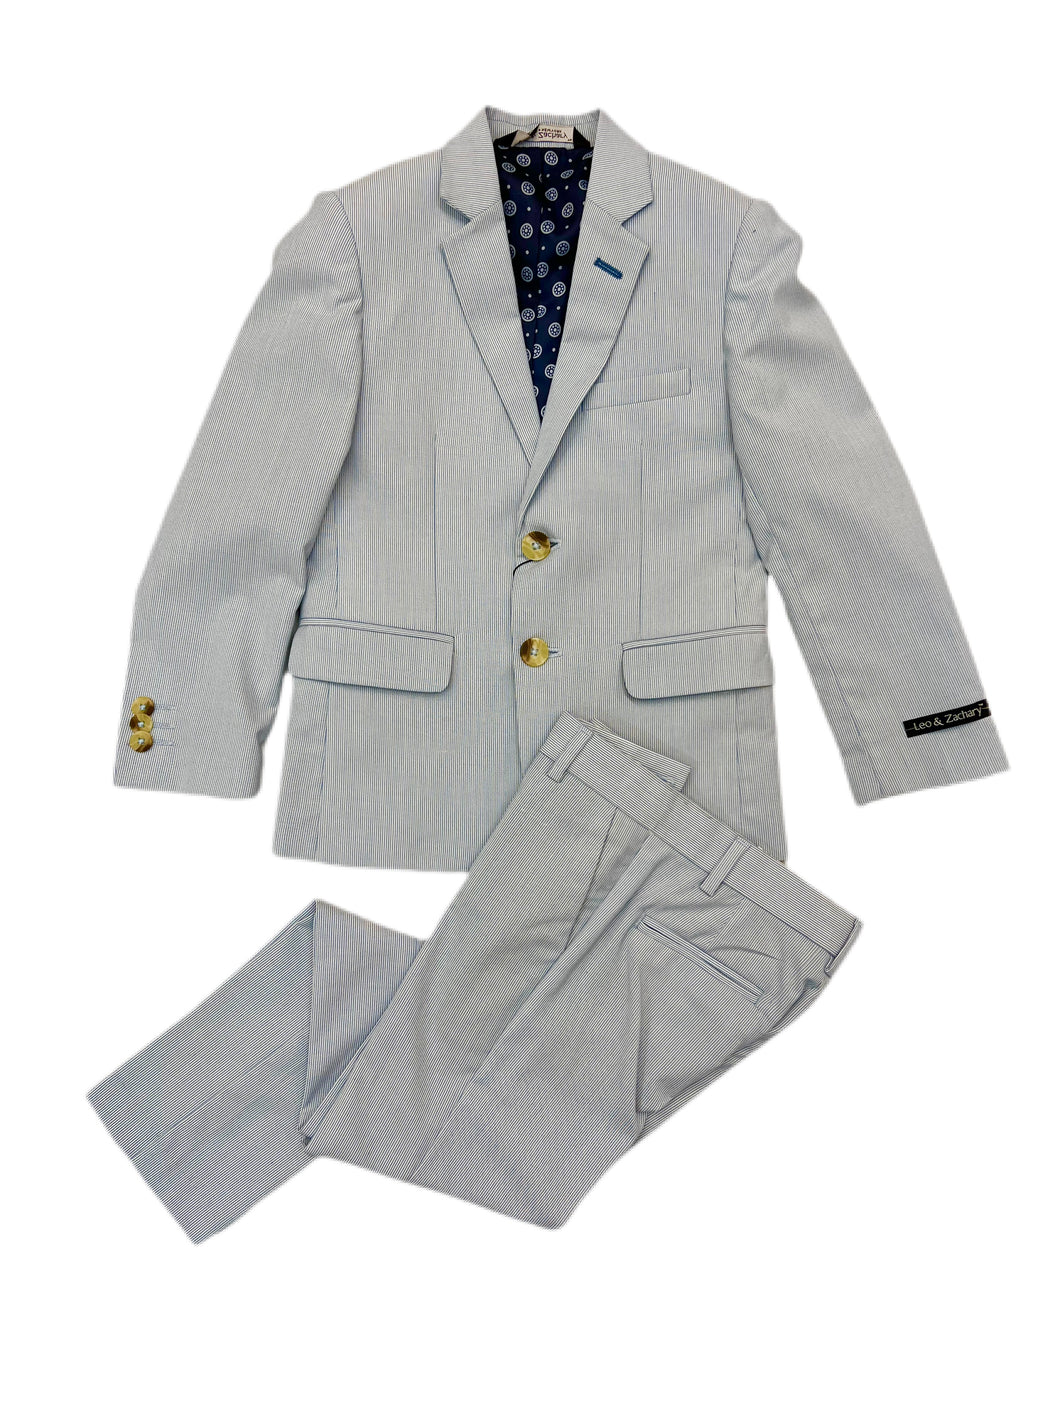 Leo & Zachary Pin Striped Suit